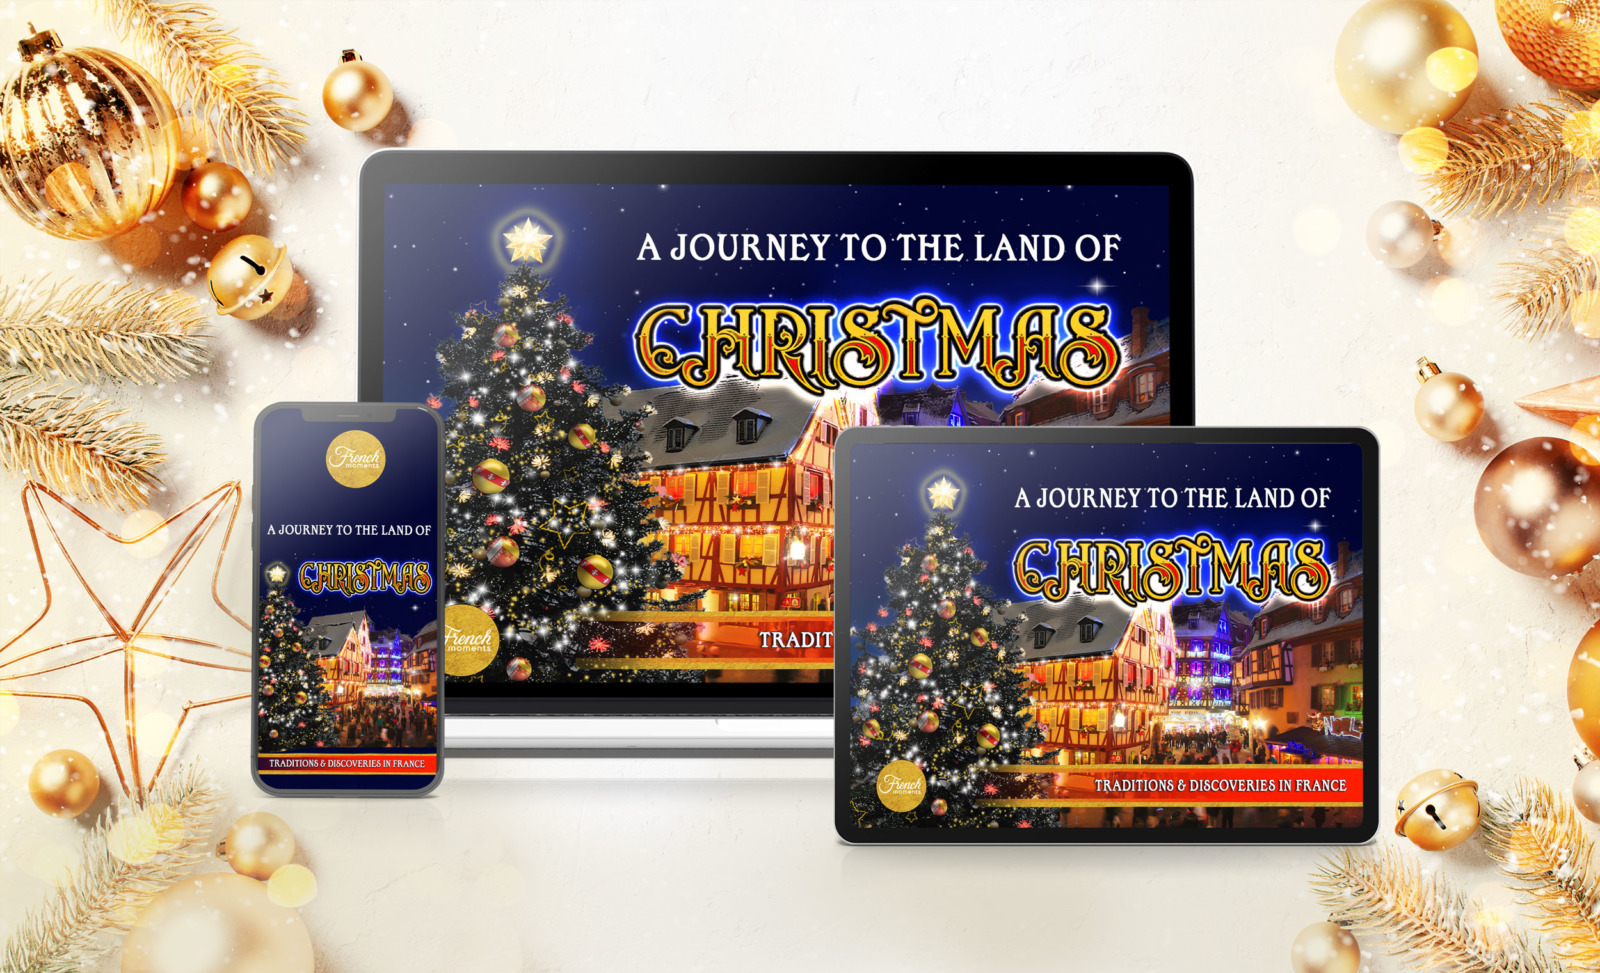 A Journey to the Land of Christmas